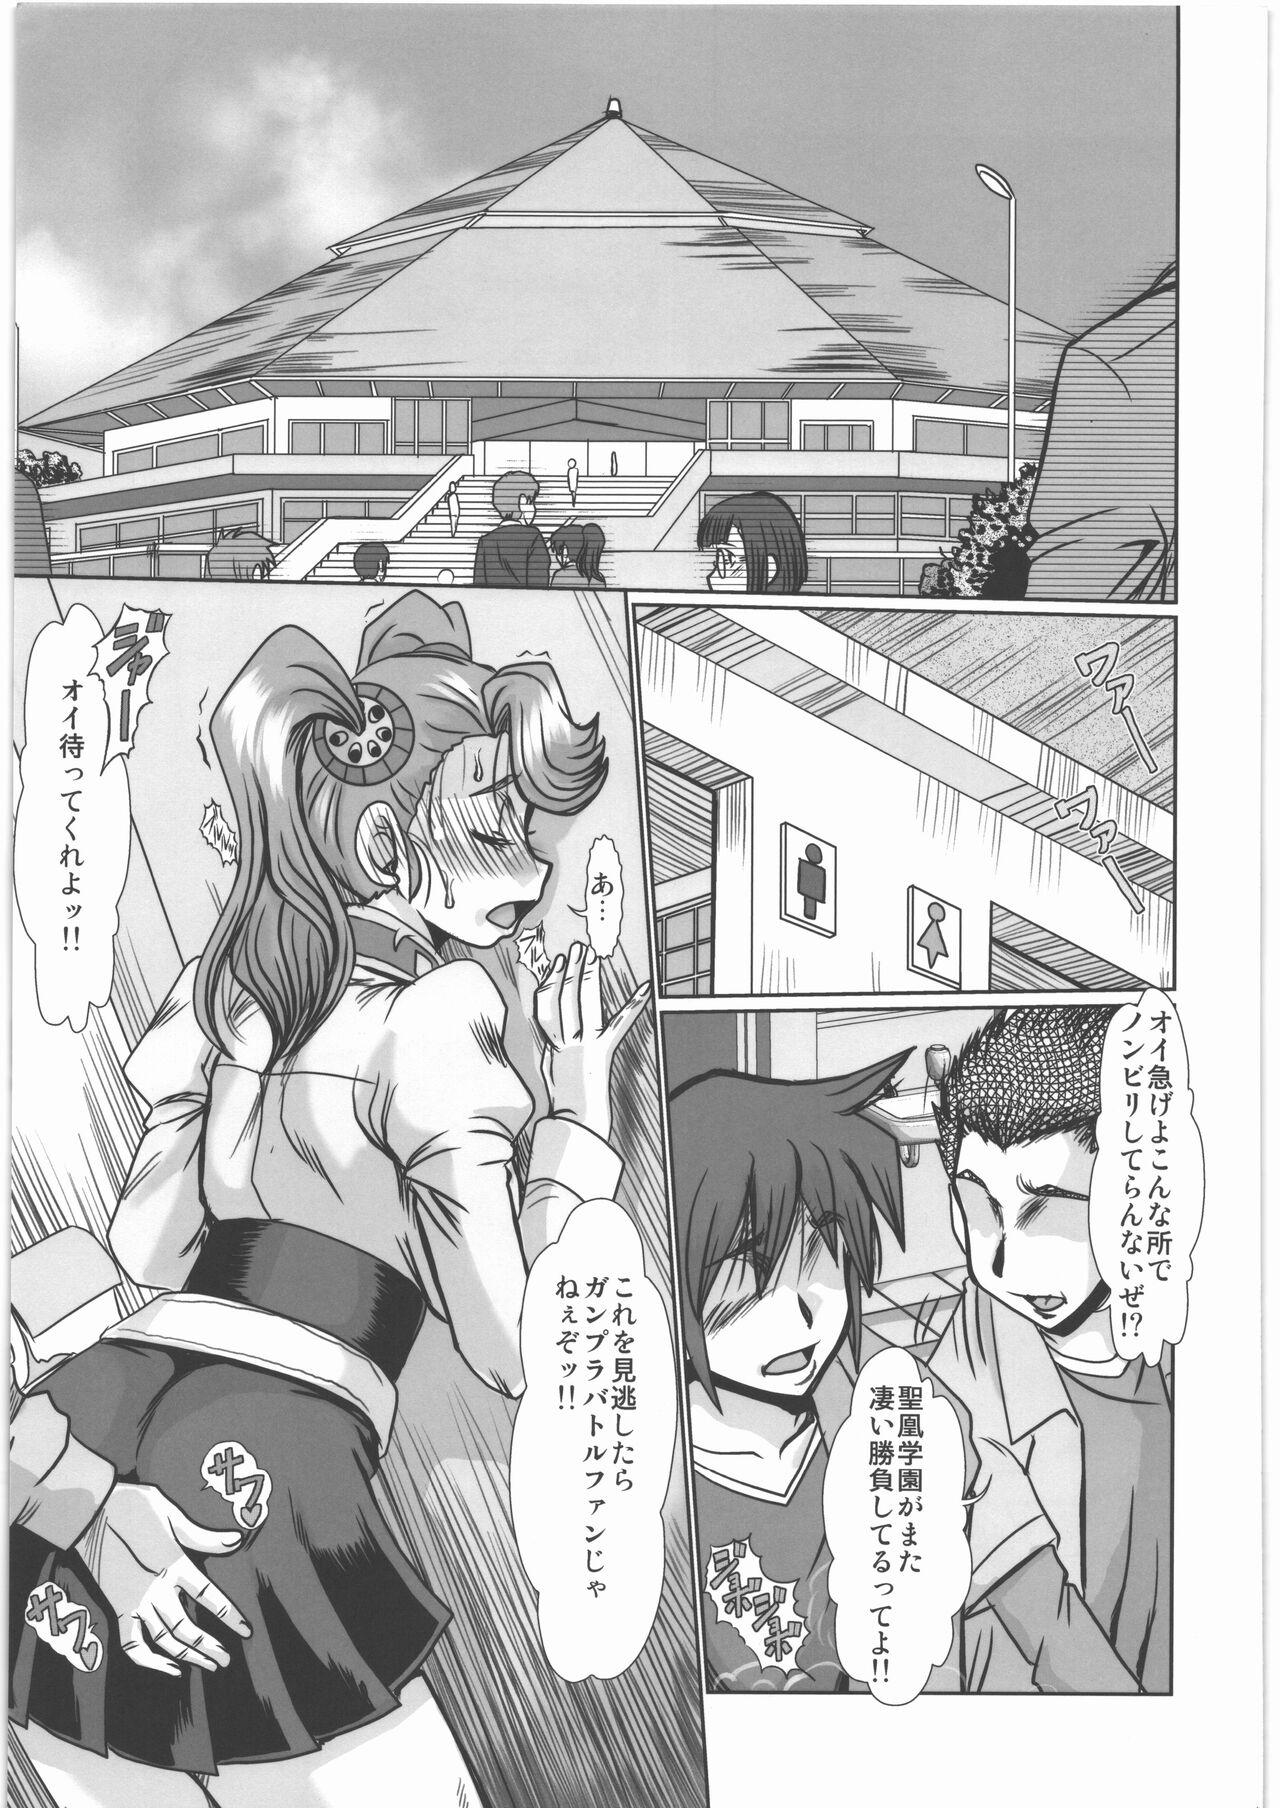 Pica F-84 - Gundam build fighters try 8teen - Page 2